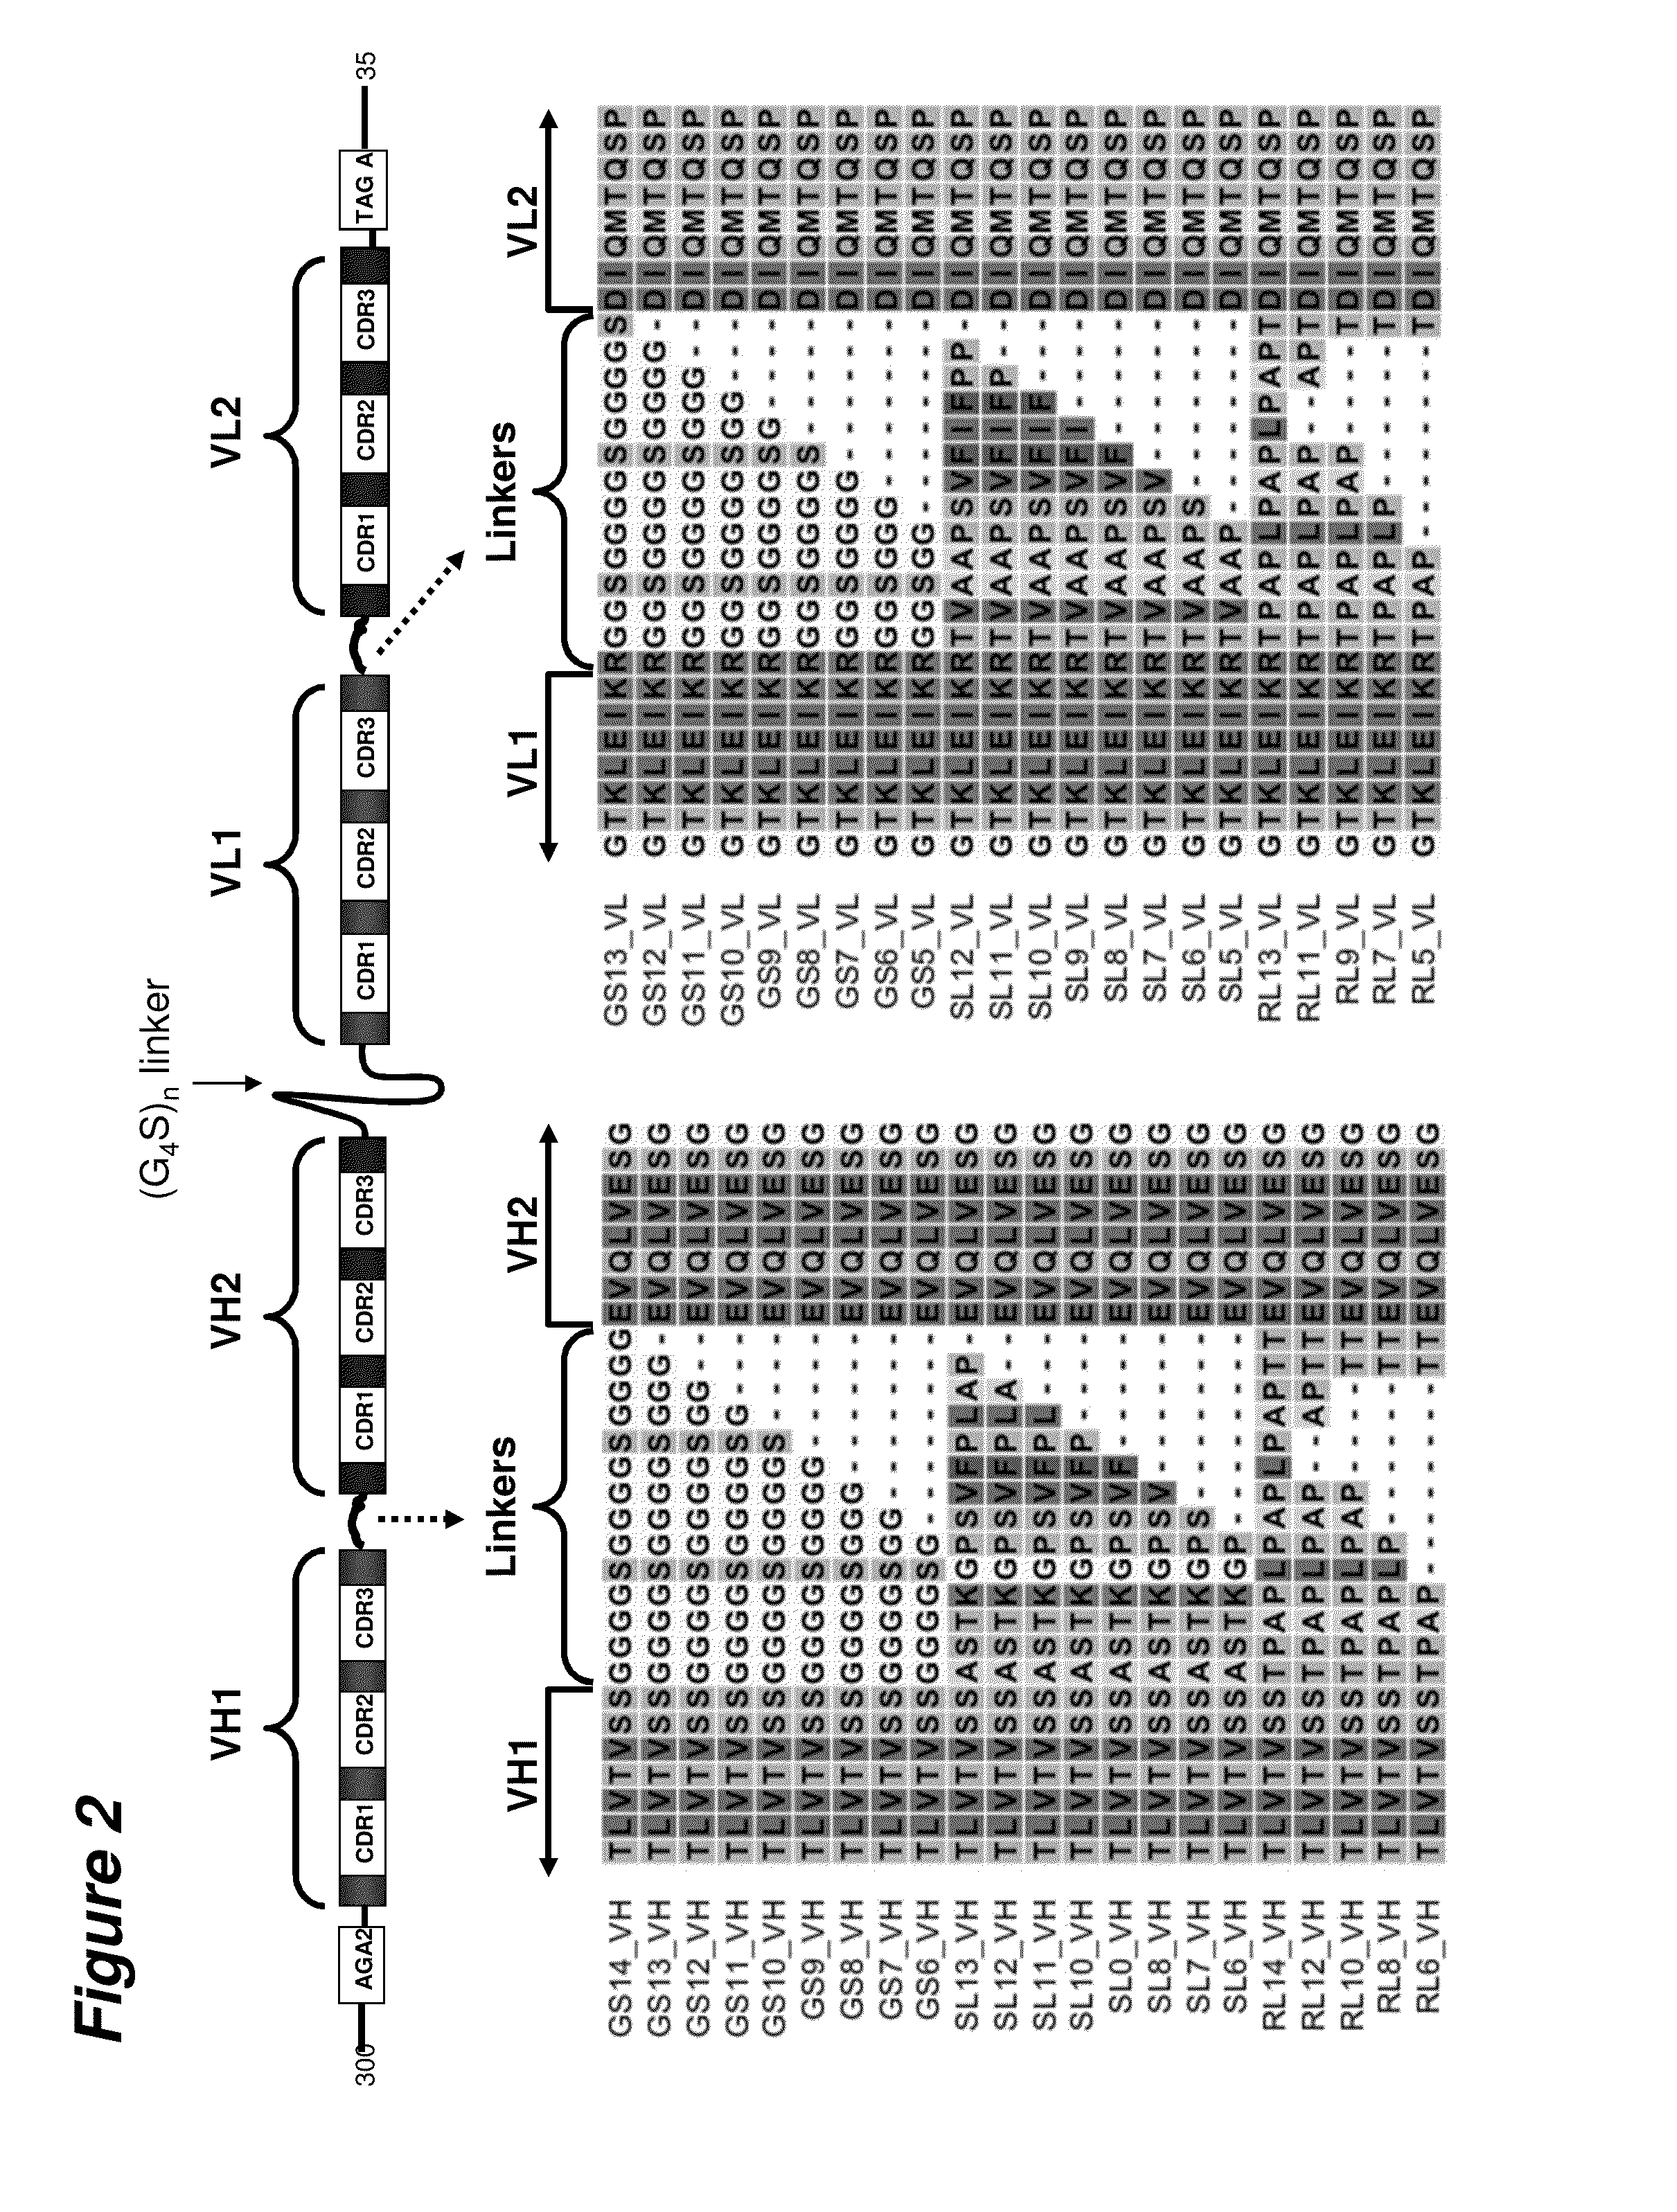 Single-chain multivalent binding protein compositions and methods